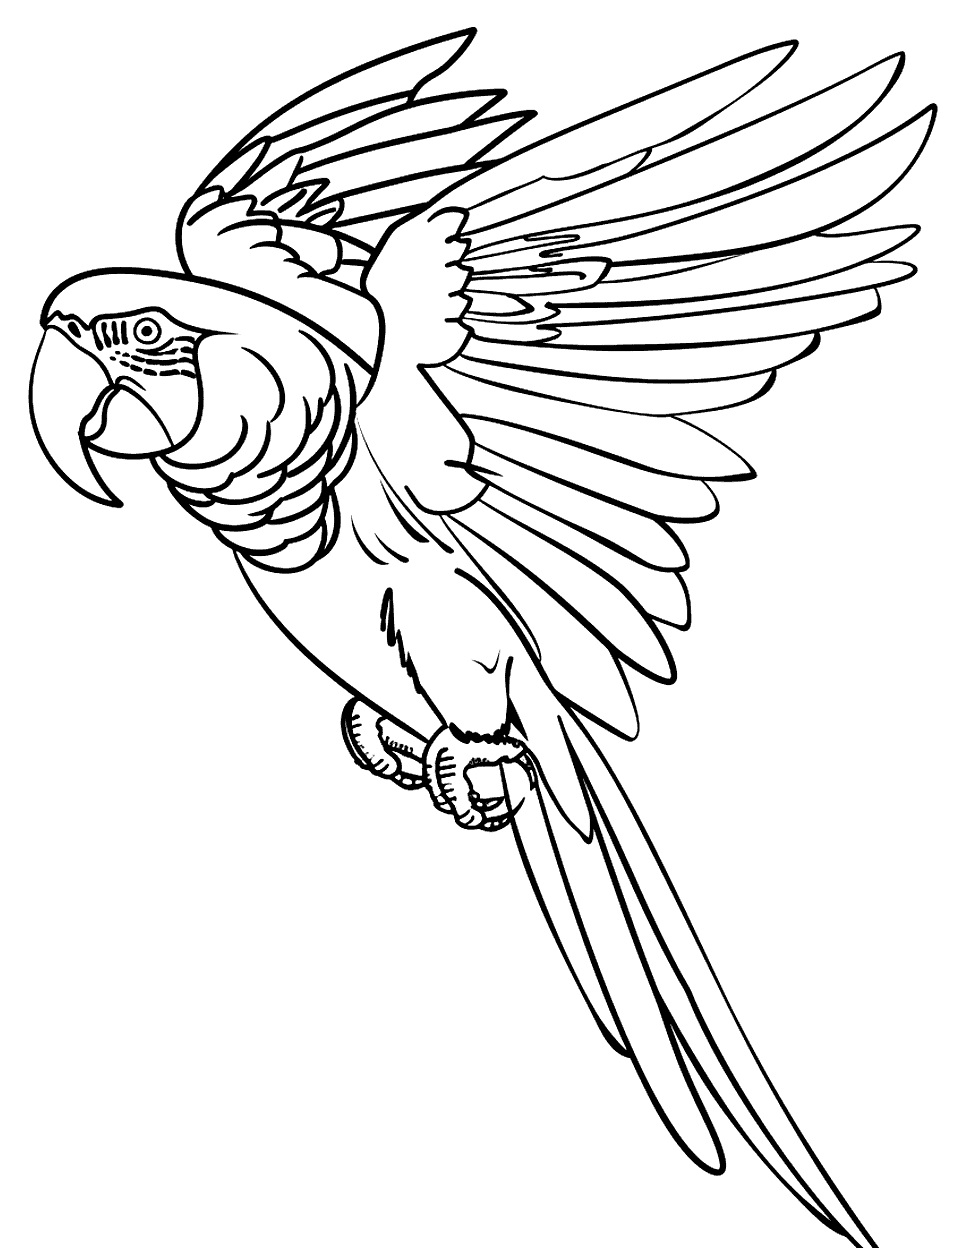 Flying Macaw Over the Amazon Parrot Coloring Page - A majestic macaw flying high.